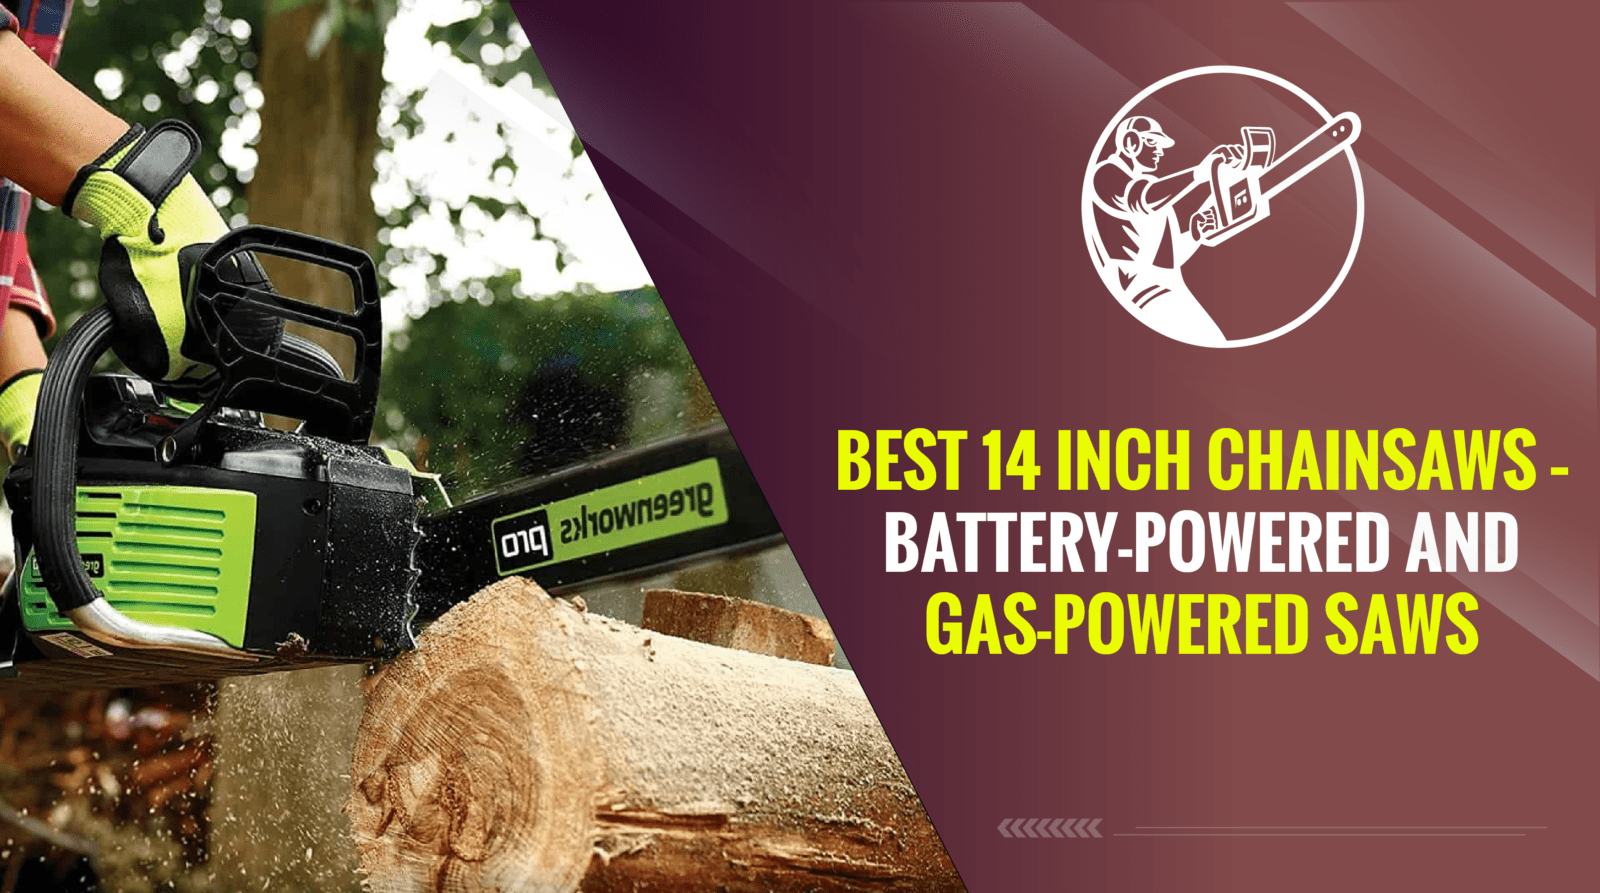 Best 14 Inch Chainsaws – Battery-Powered and Gas-Powered Saws